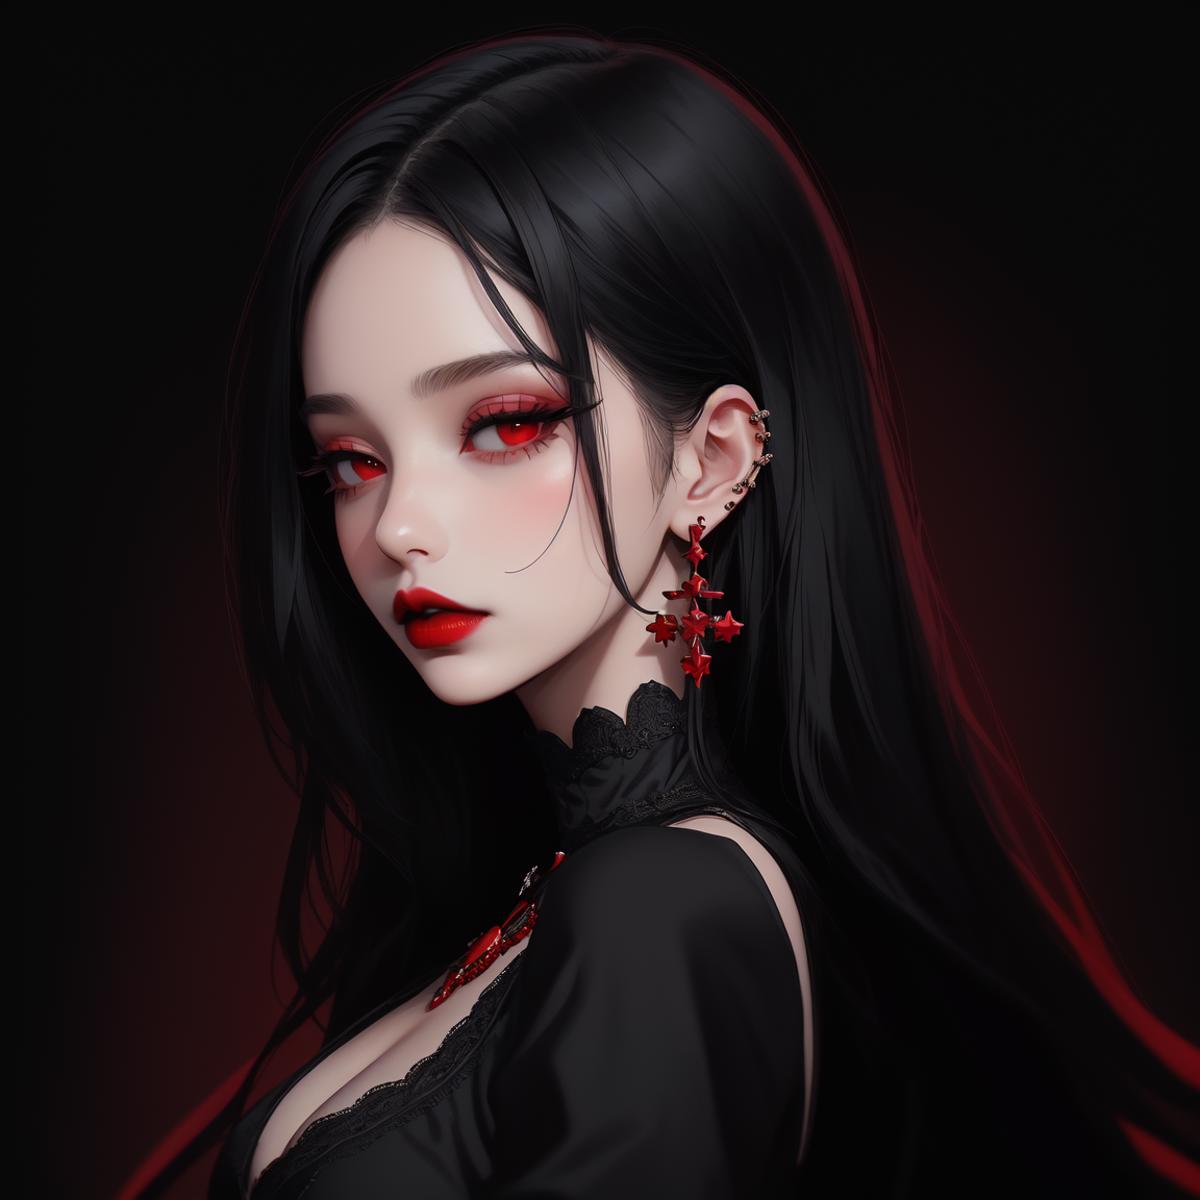 Gothic Girl image by We11